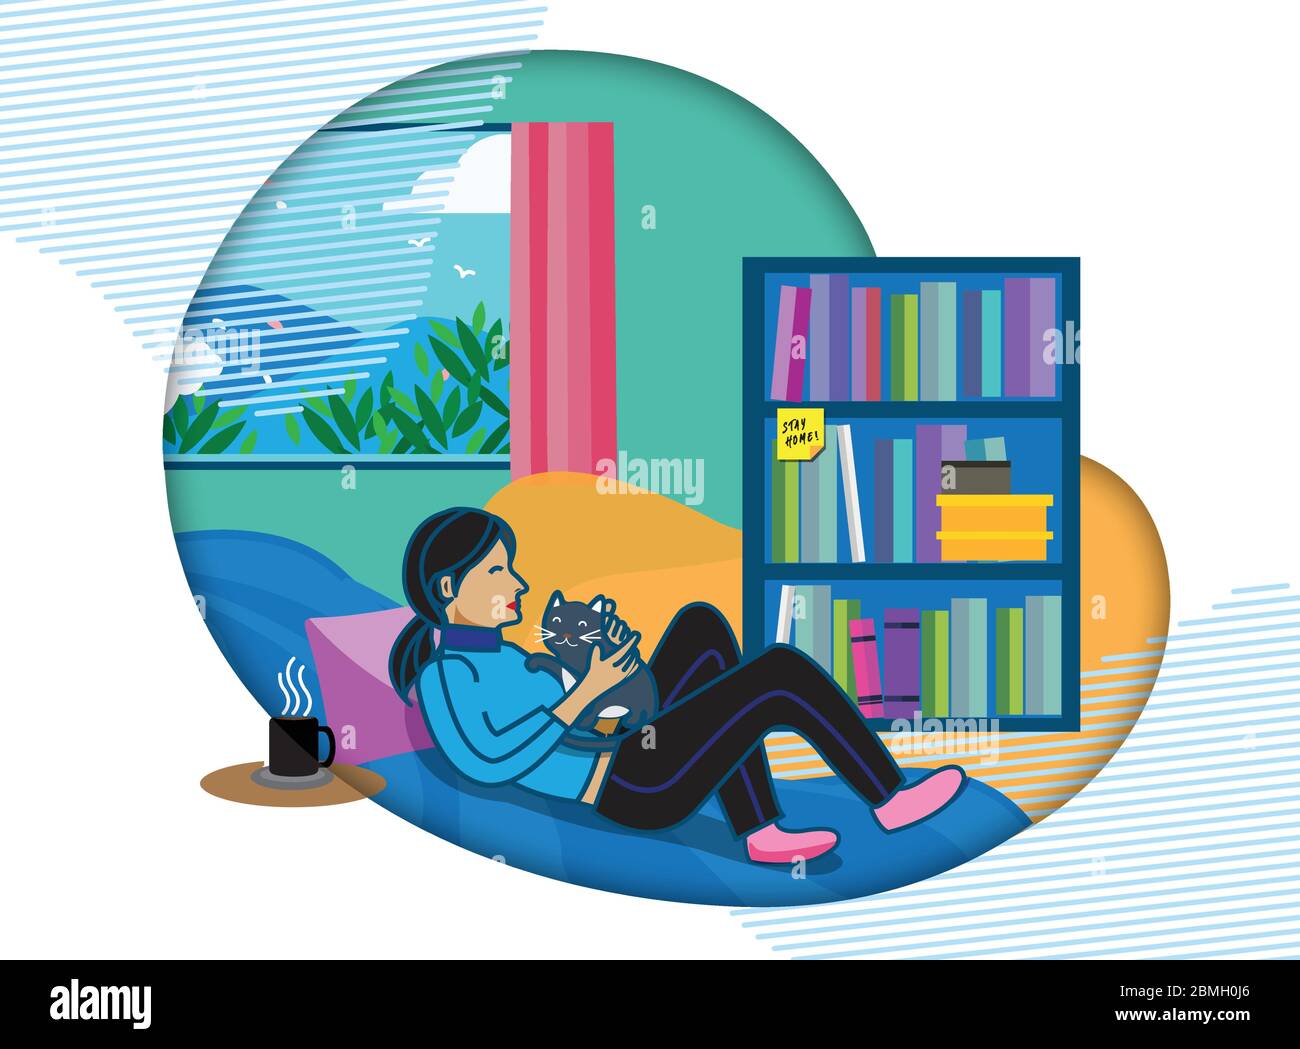 Woman laying on the sofa and playing with her cat. Practice social distance and stay home during coronavirus outbreak period. Stock Vector